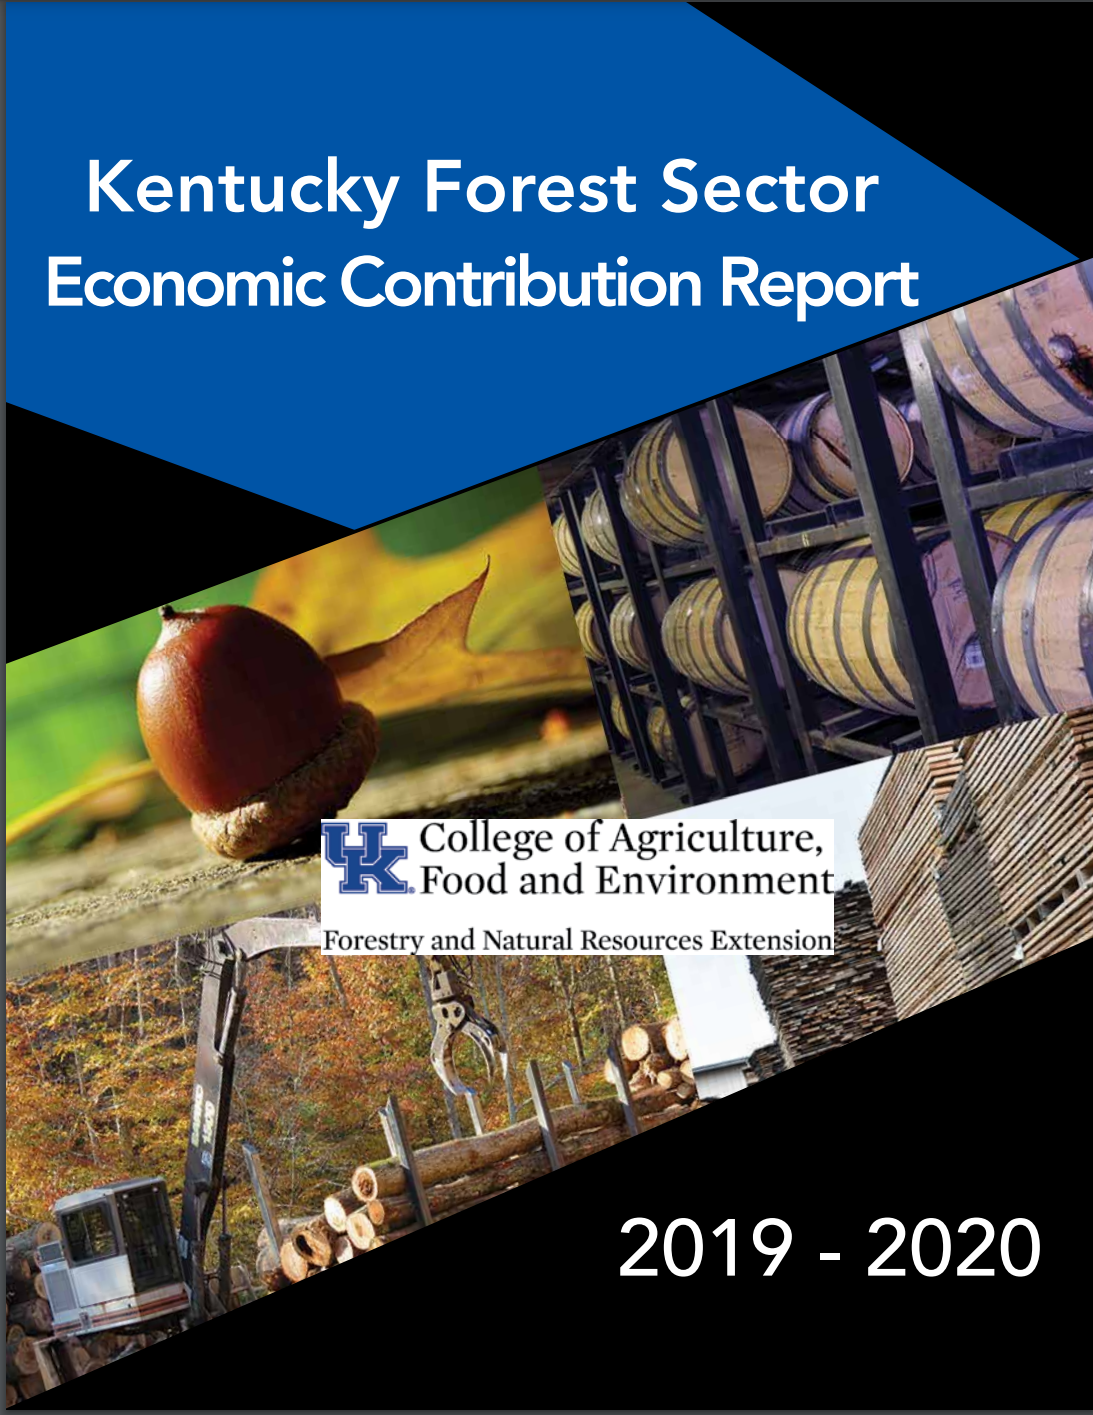 Front cover of and link to the 2019-2020 Kentucky Forest Sector Economic Contribution Report